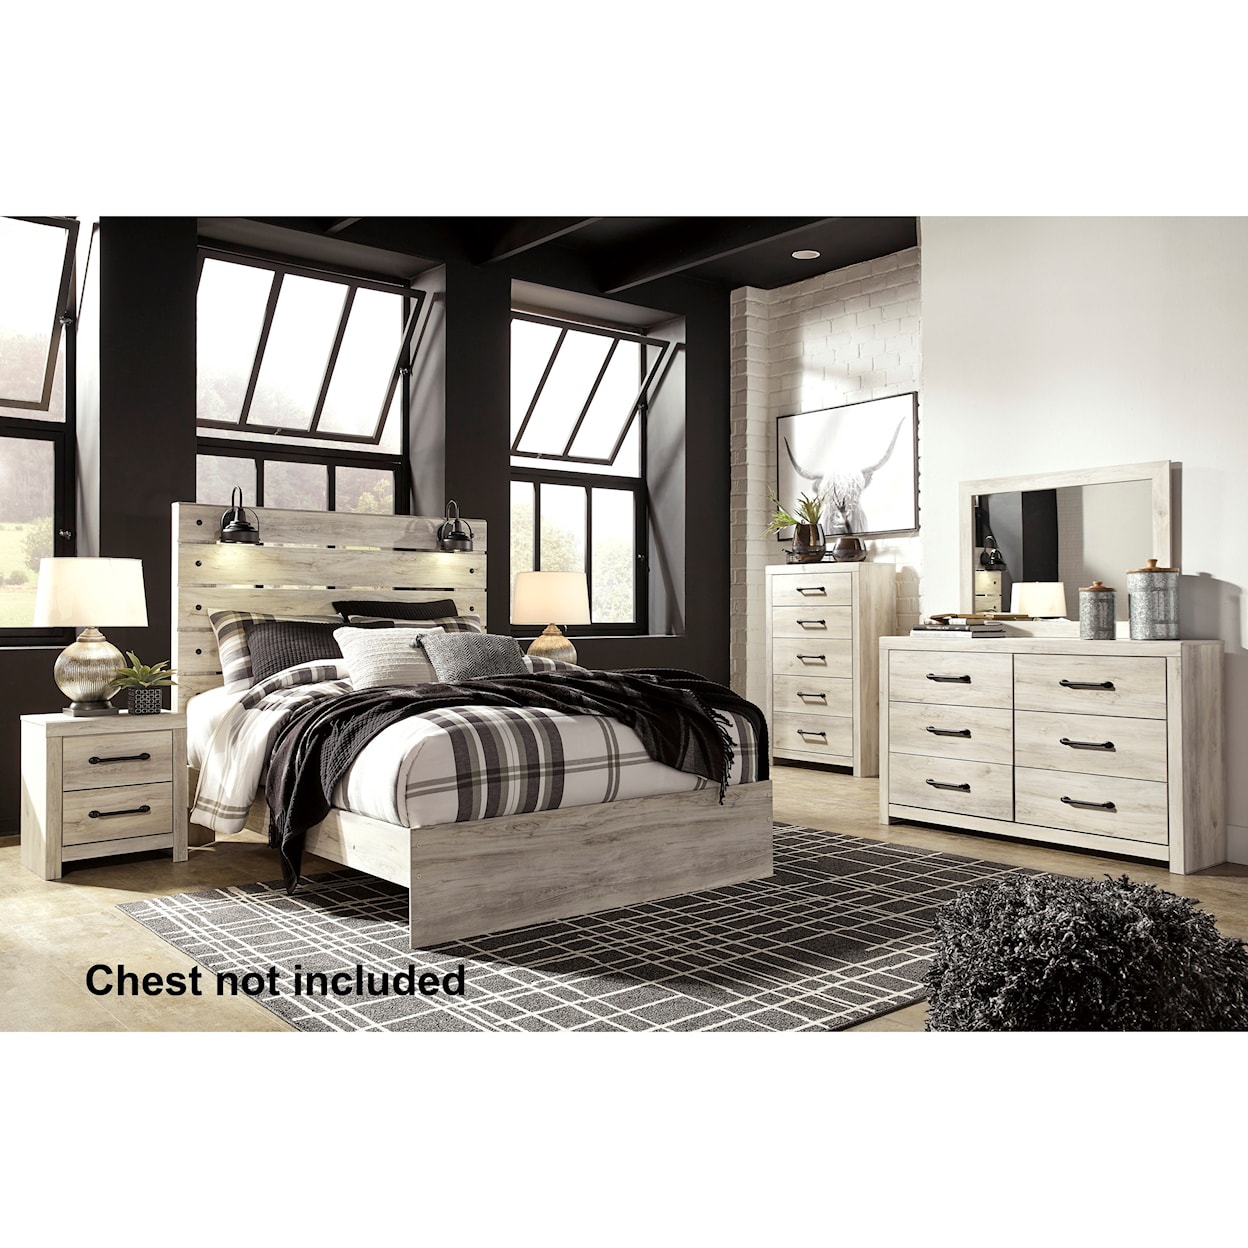 Ashley Furniture Signature Design Cambeck Queen Bedroom Group